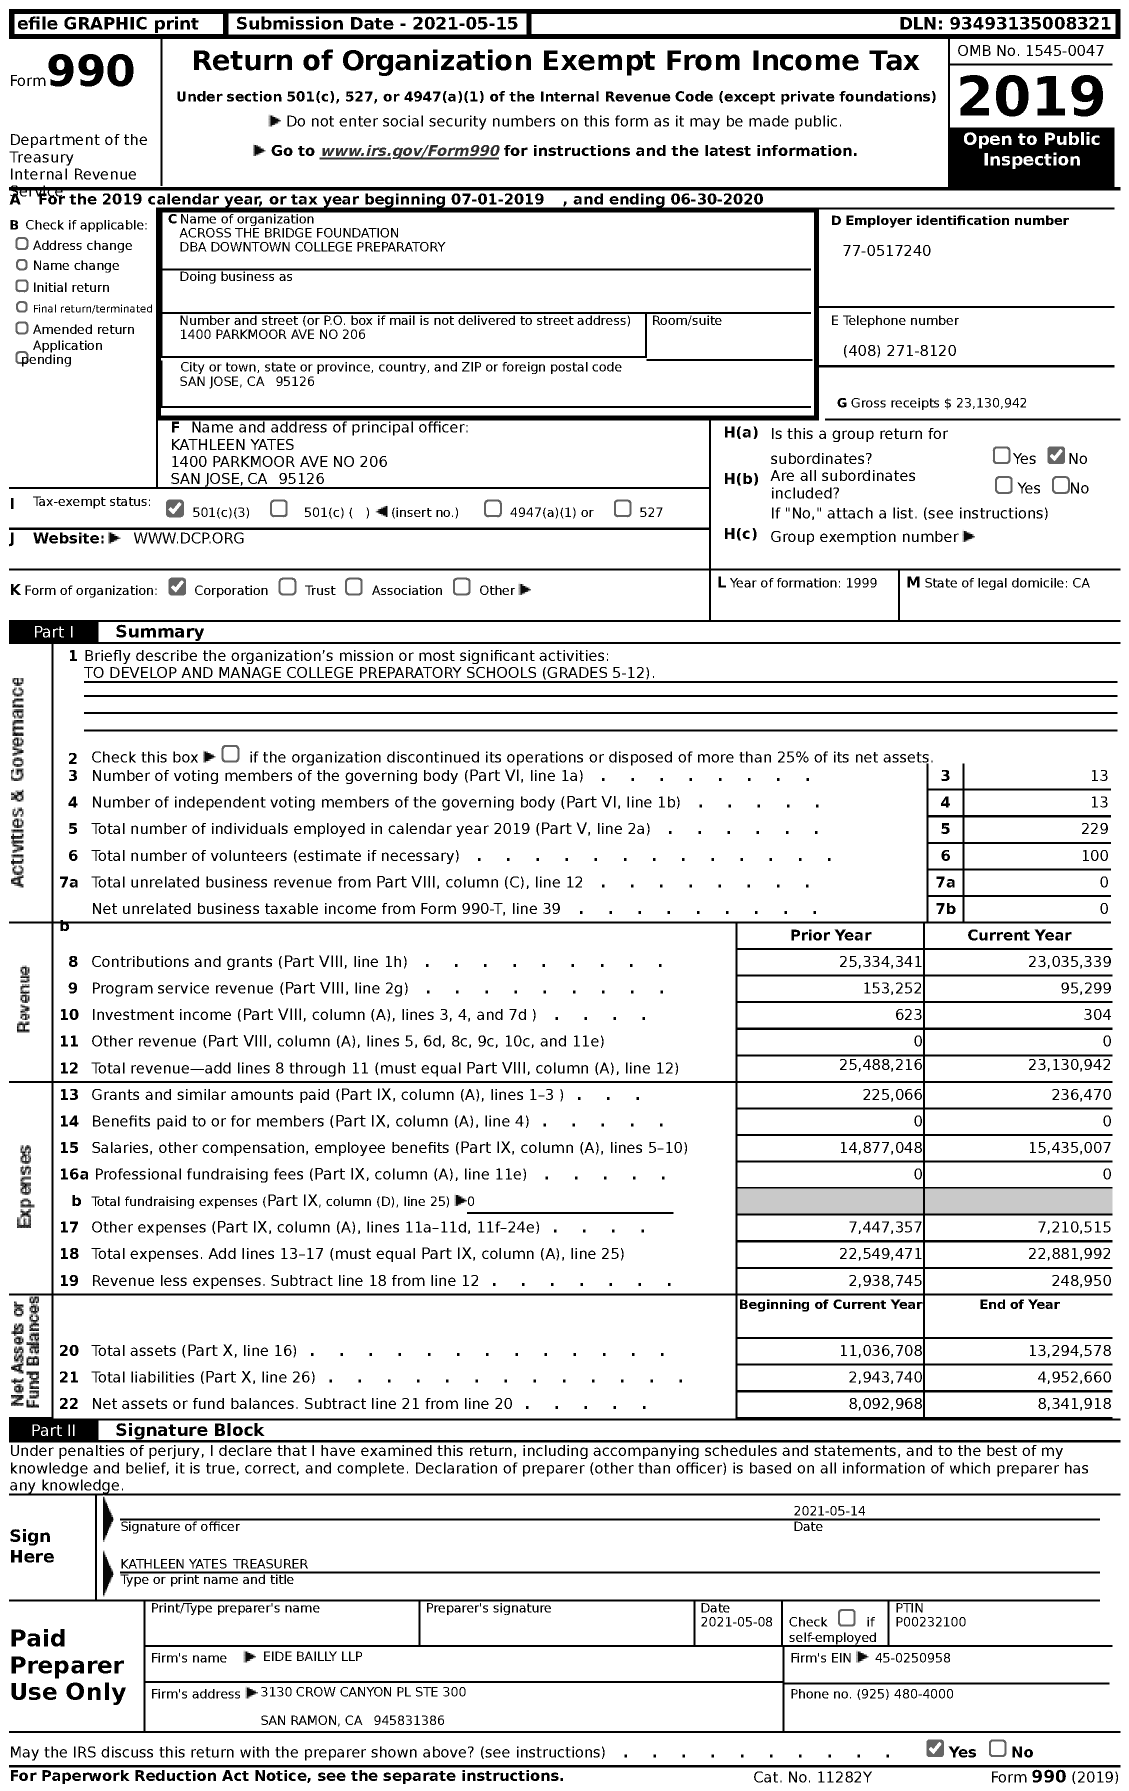 Image of first page of 2019 Form 990 for Downtown College Preparatory (DCP)